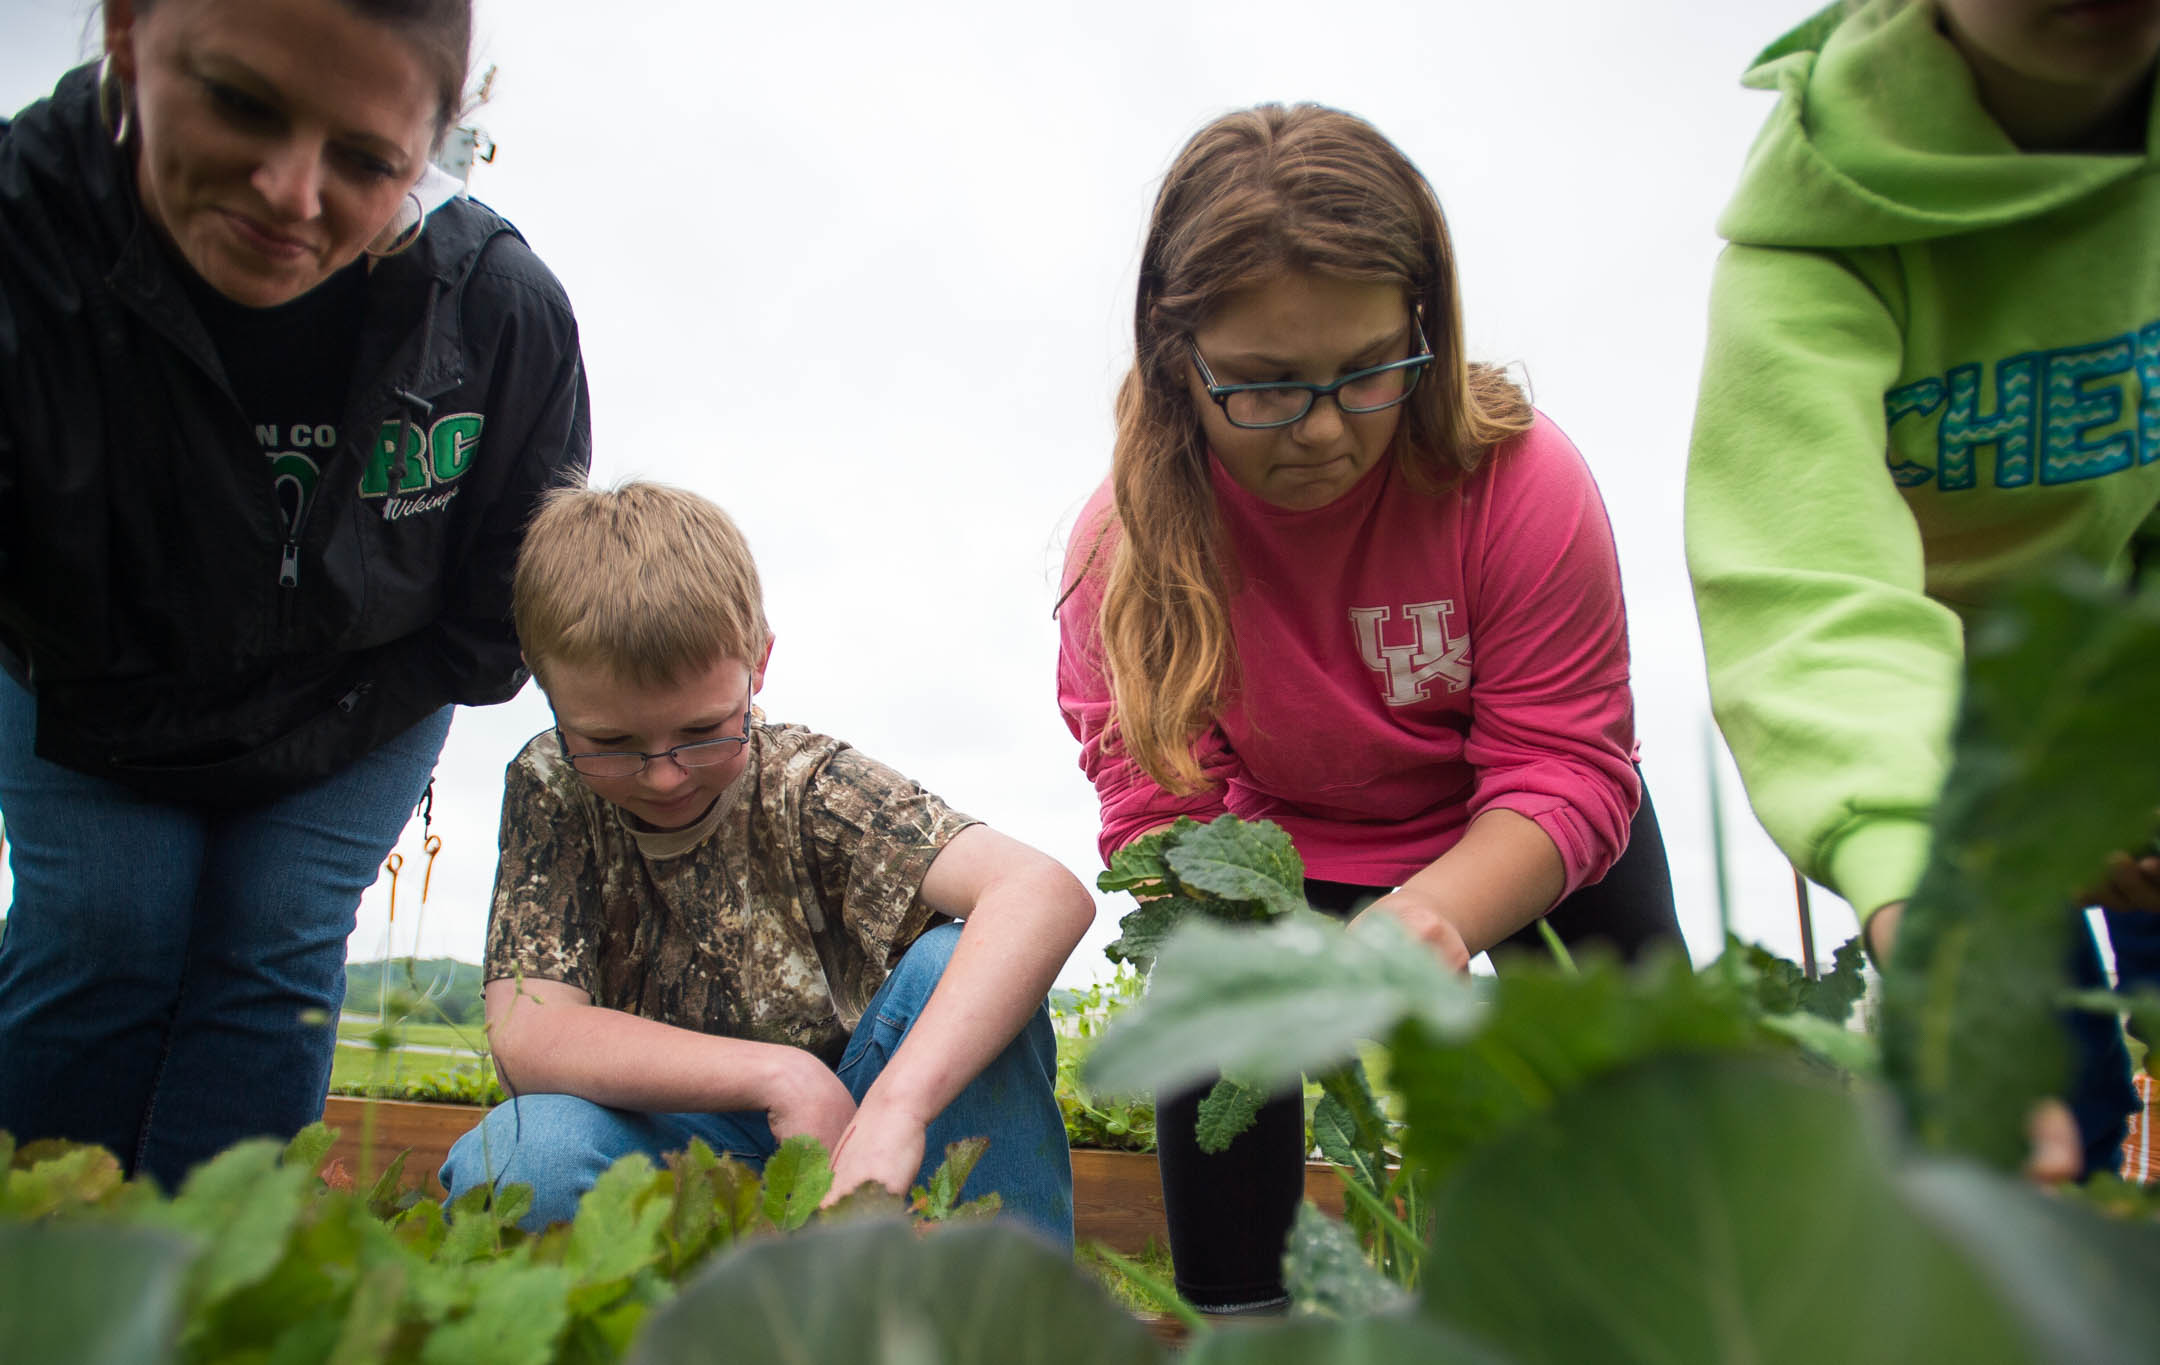 Sixth-graders Gabe Kidd, left, and Jenna Hunt help teacher Jennifer Pecco pick kale out of one of the raised garden beds at Rowan County Middle School. The beds are part of the school's project-based learning initiative to combat hunger in the community. Photo by Bobby Ellis, May 18, 2016